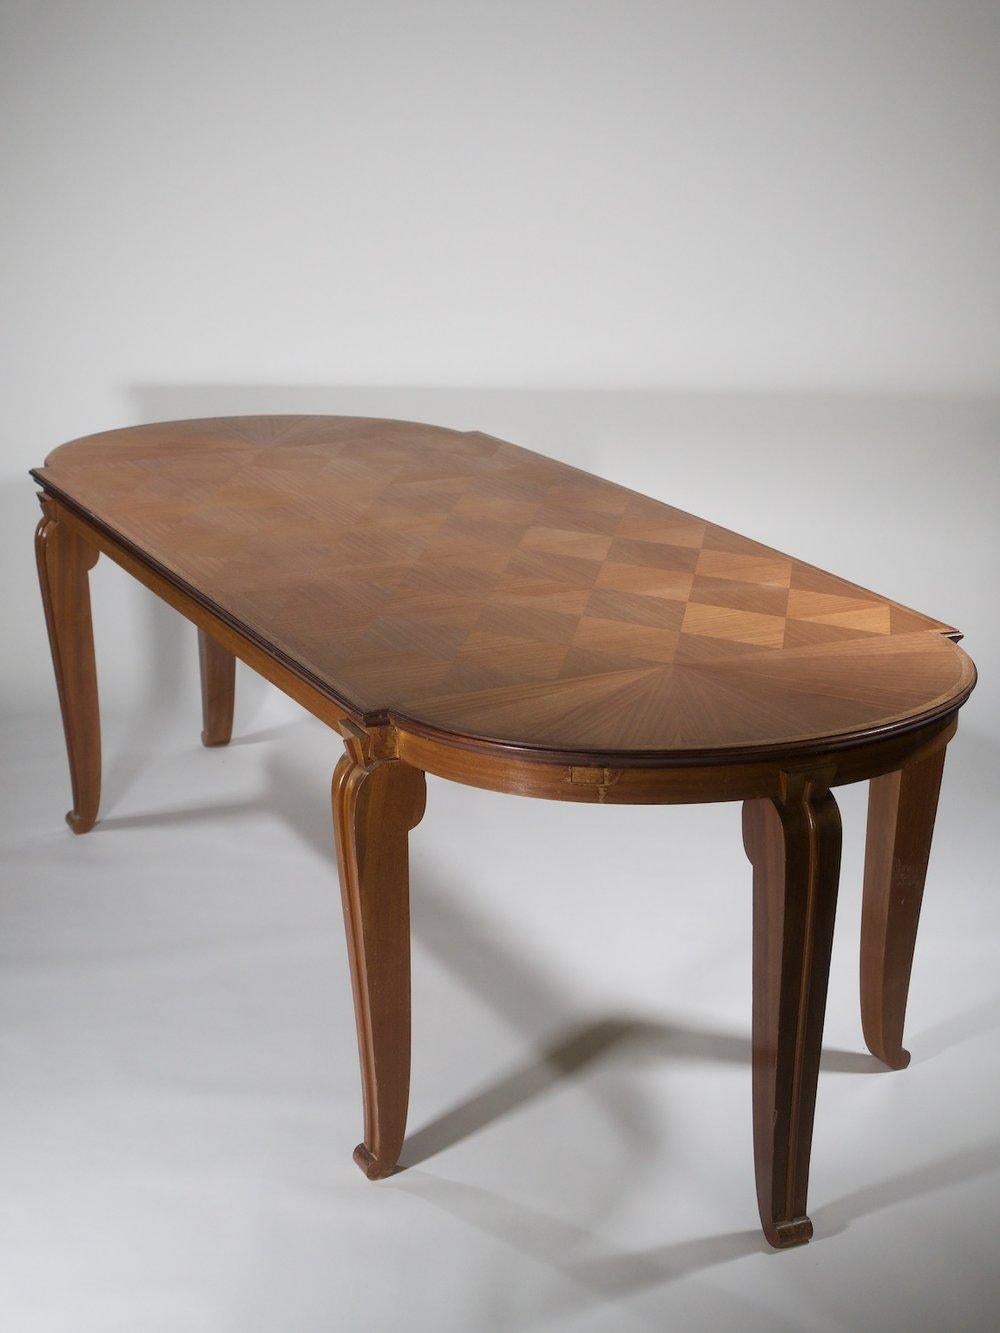 Andre Arbus French Art Deco Dining Table In Good Condition For Sale In Philadelphia, PA